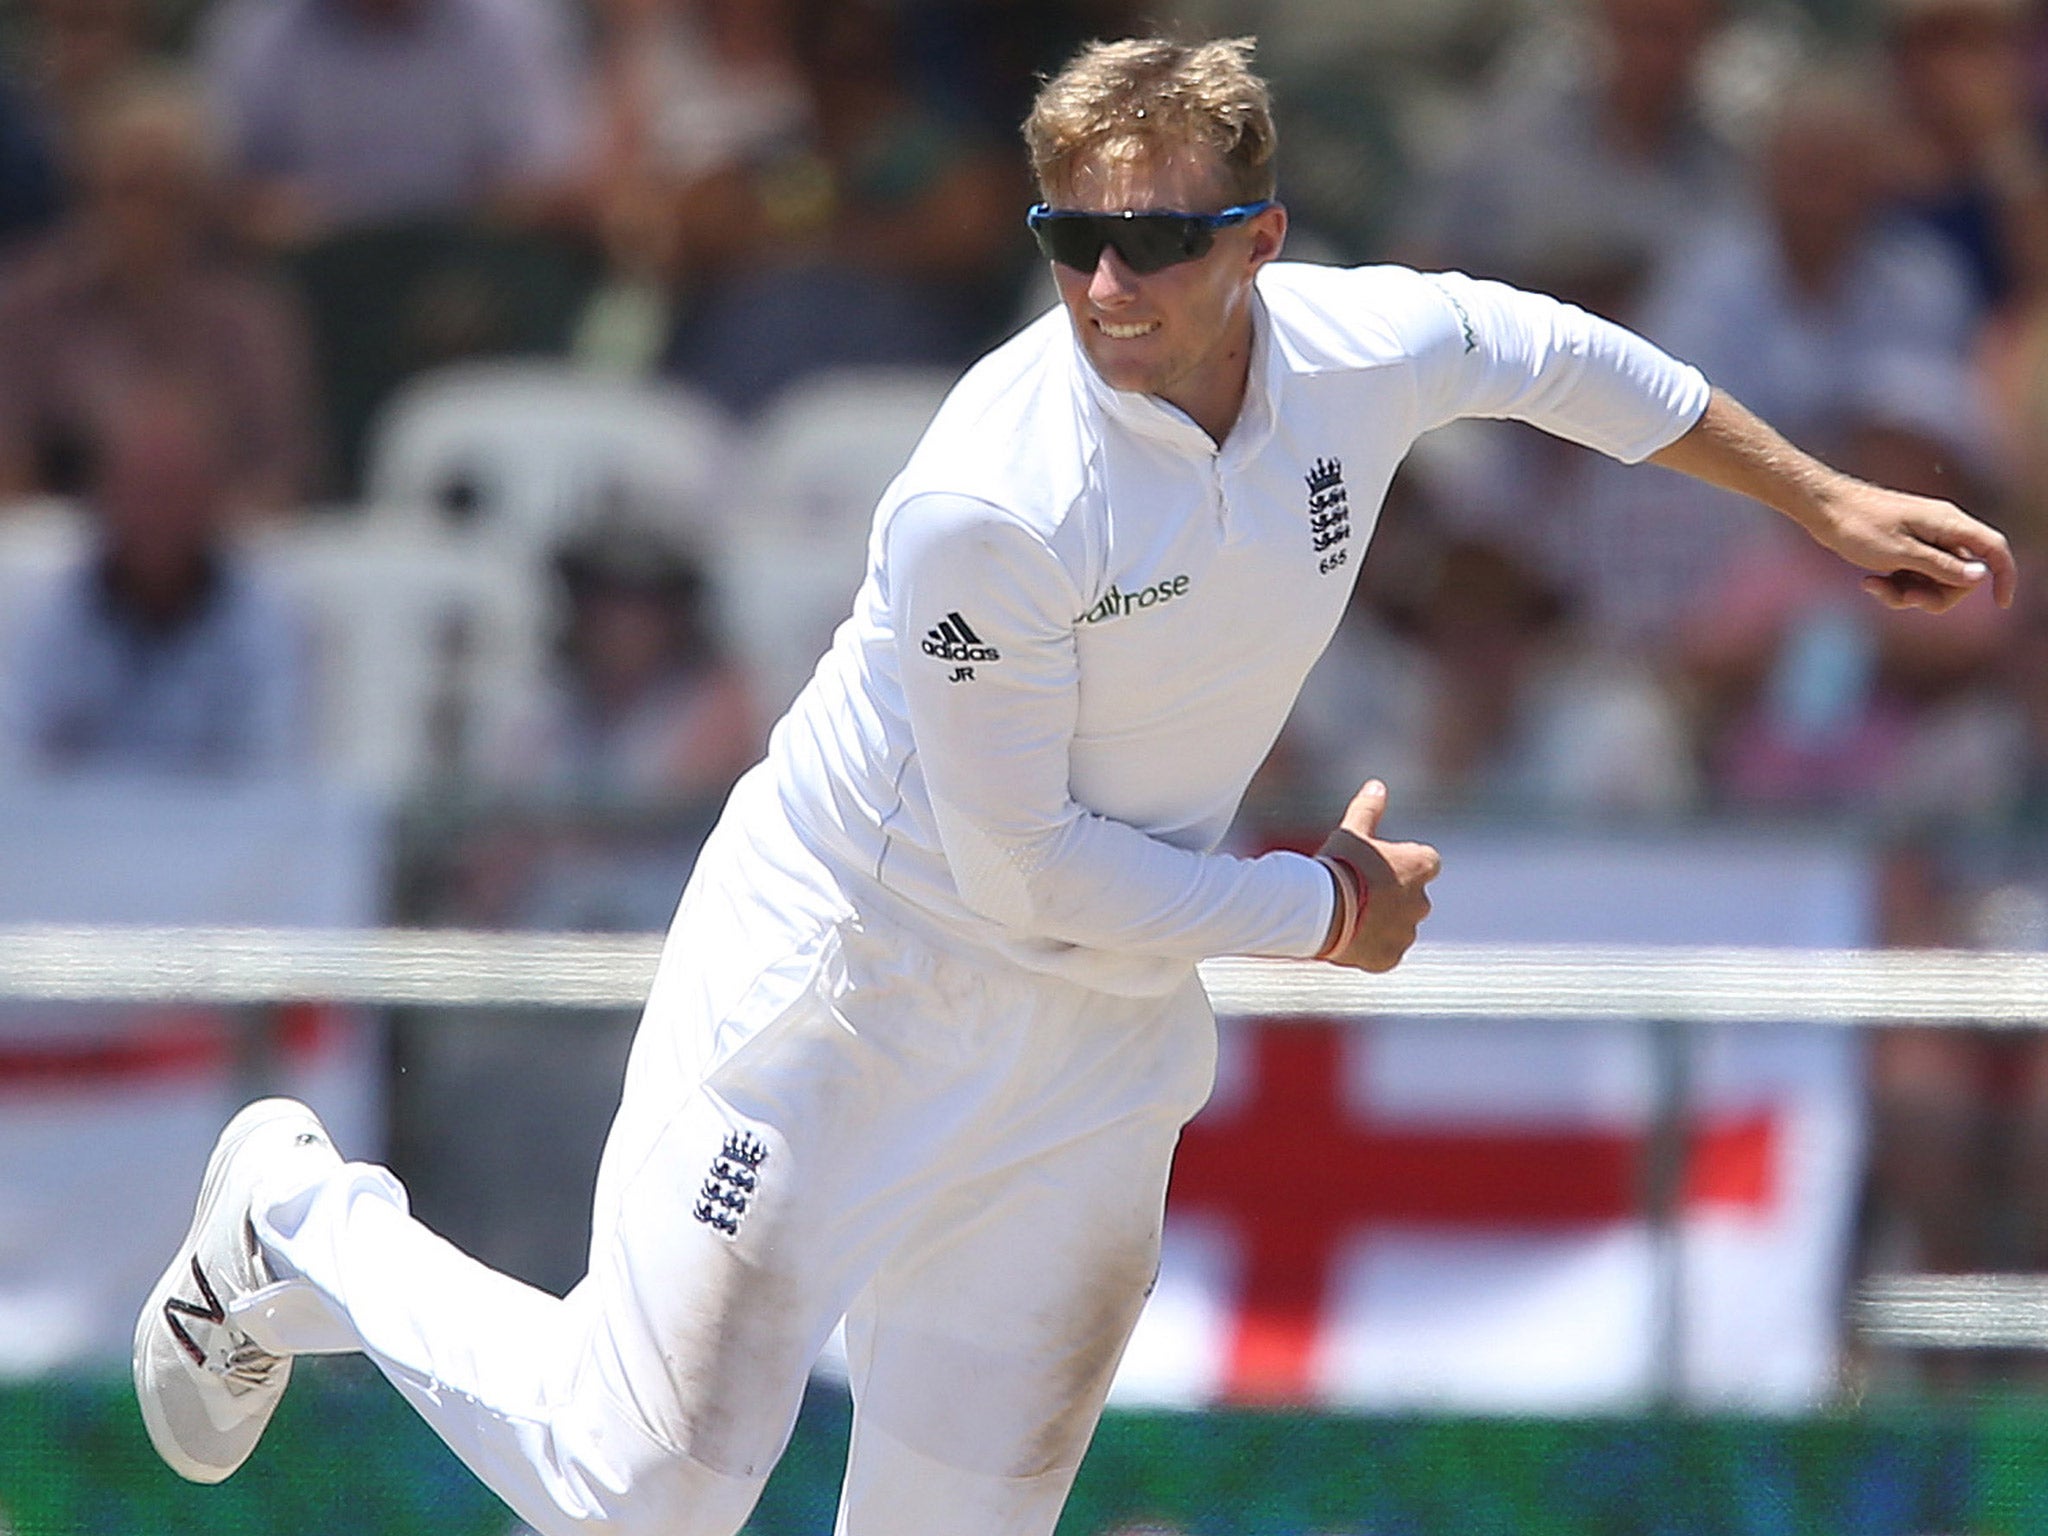 Joe Root could prove England's best part-time spin bowler if given the chance